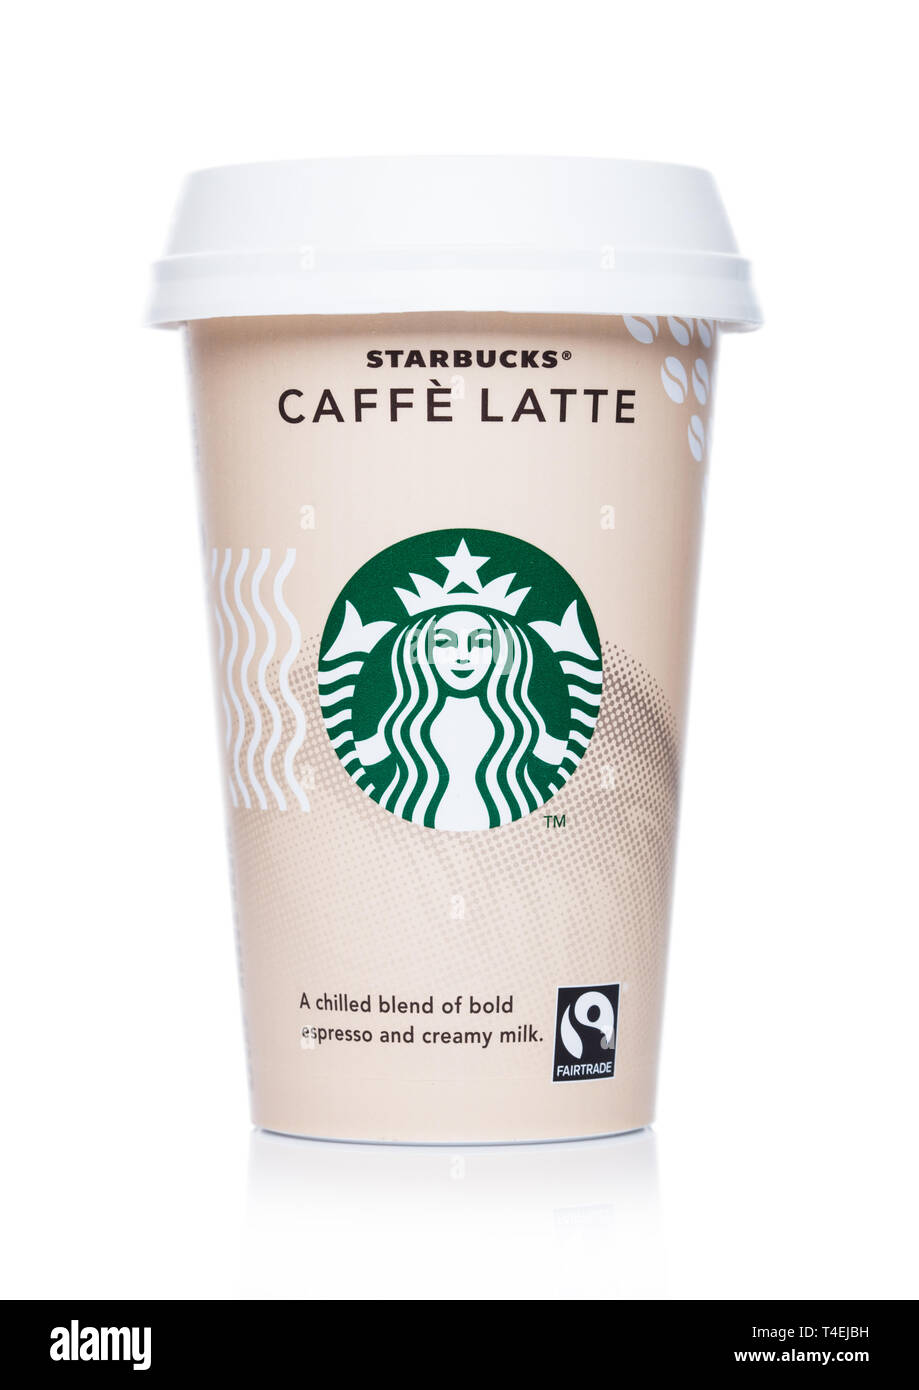 LONDON, UK - APRIL 15, 2019: Paper cup of Starbucks cold coffee. Caffe Latte on white. Stock Photo